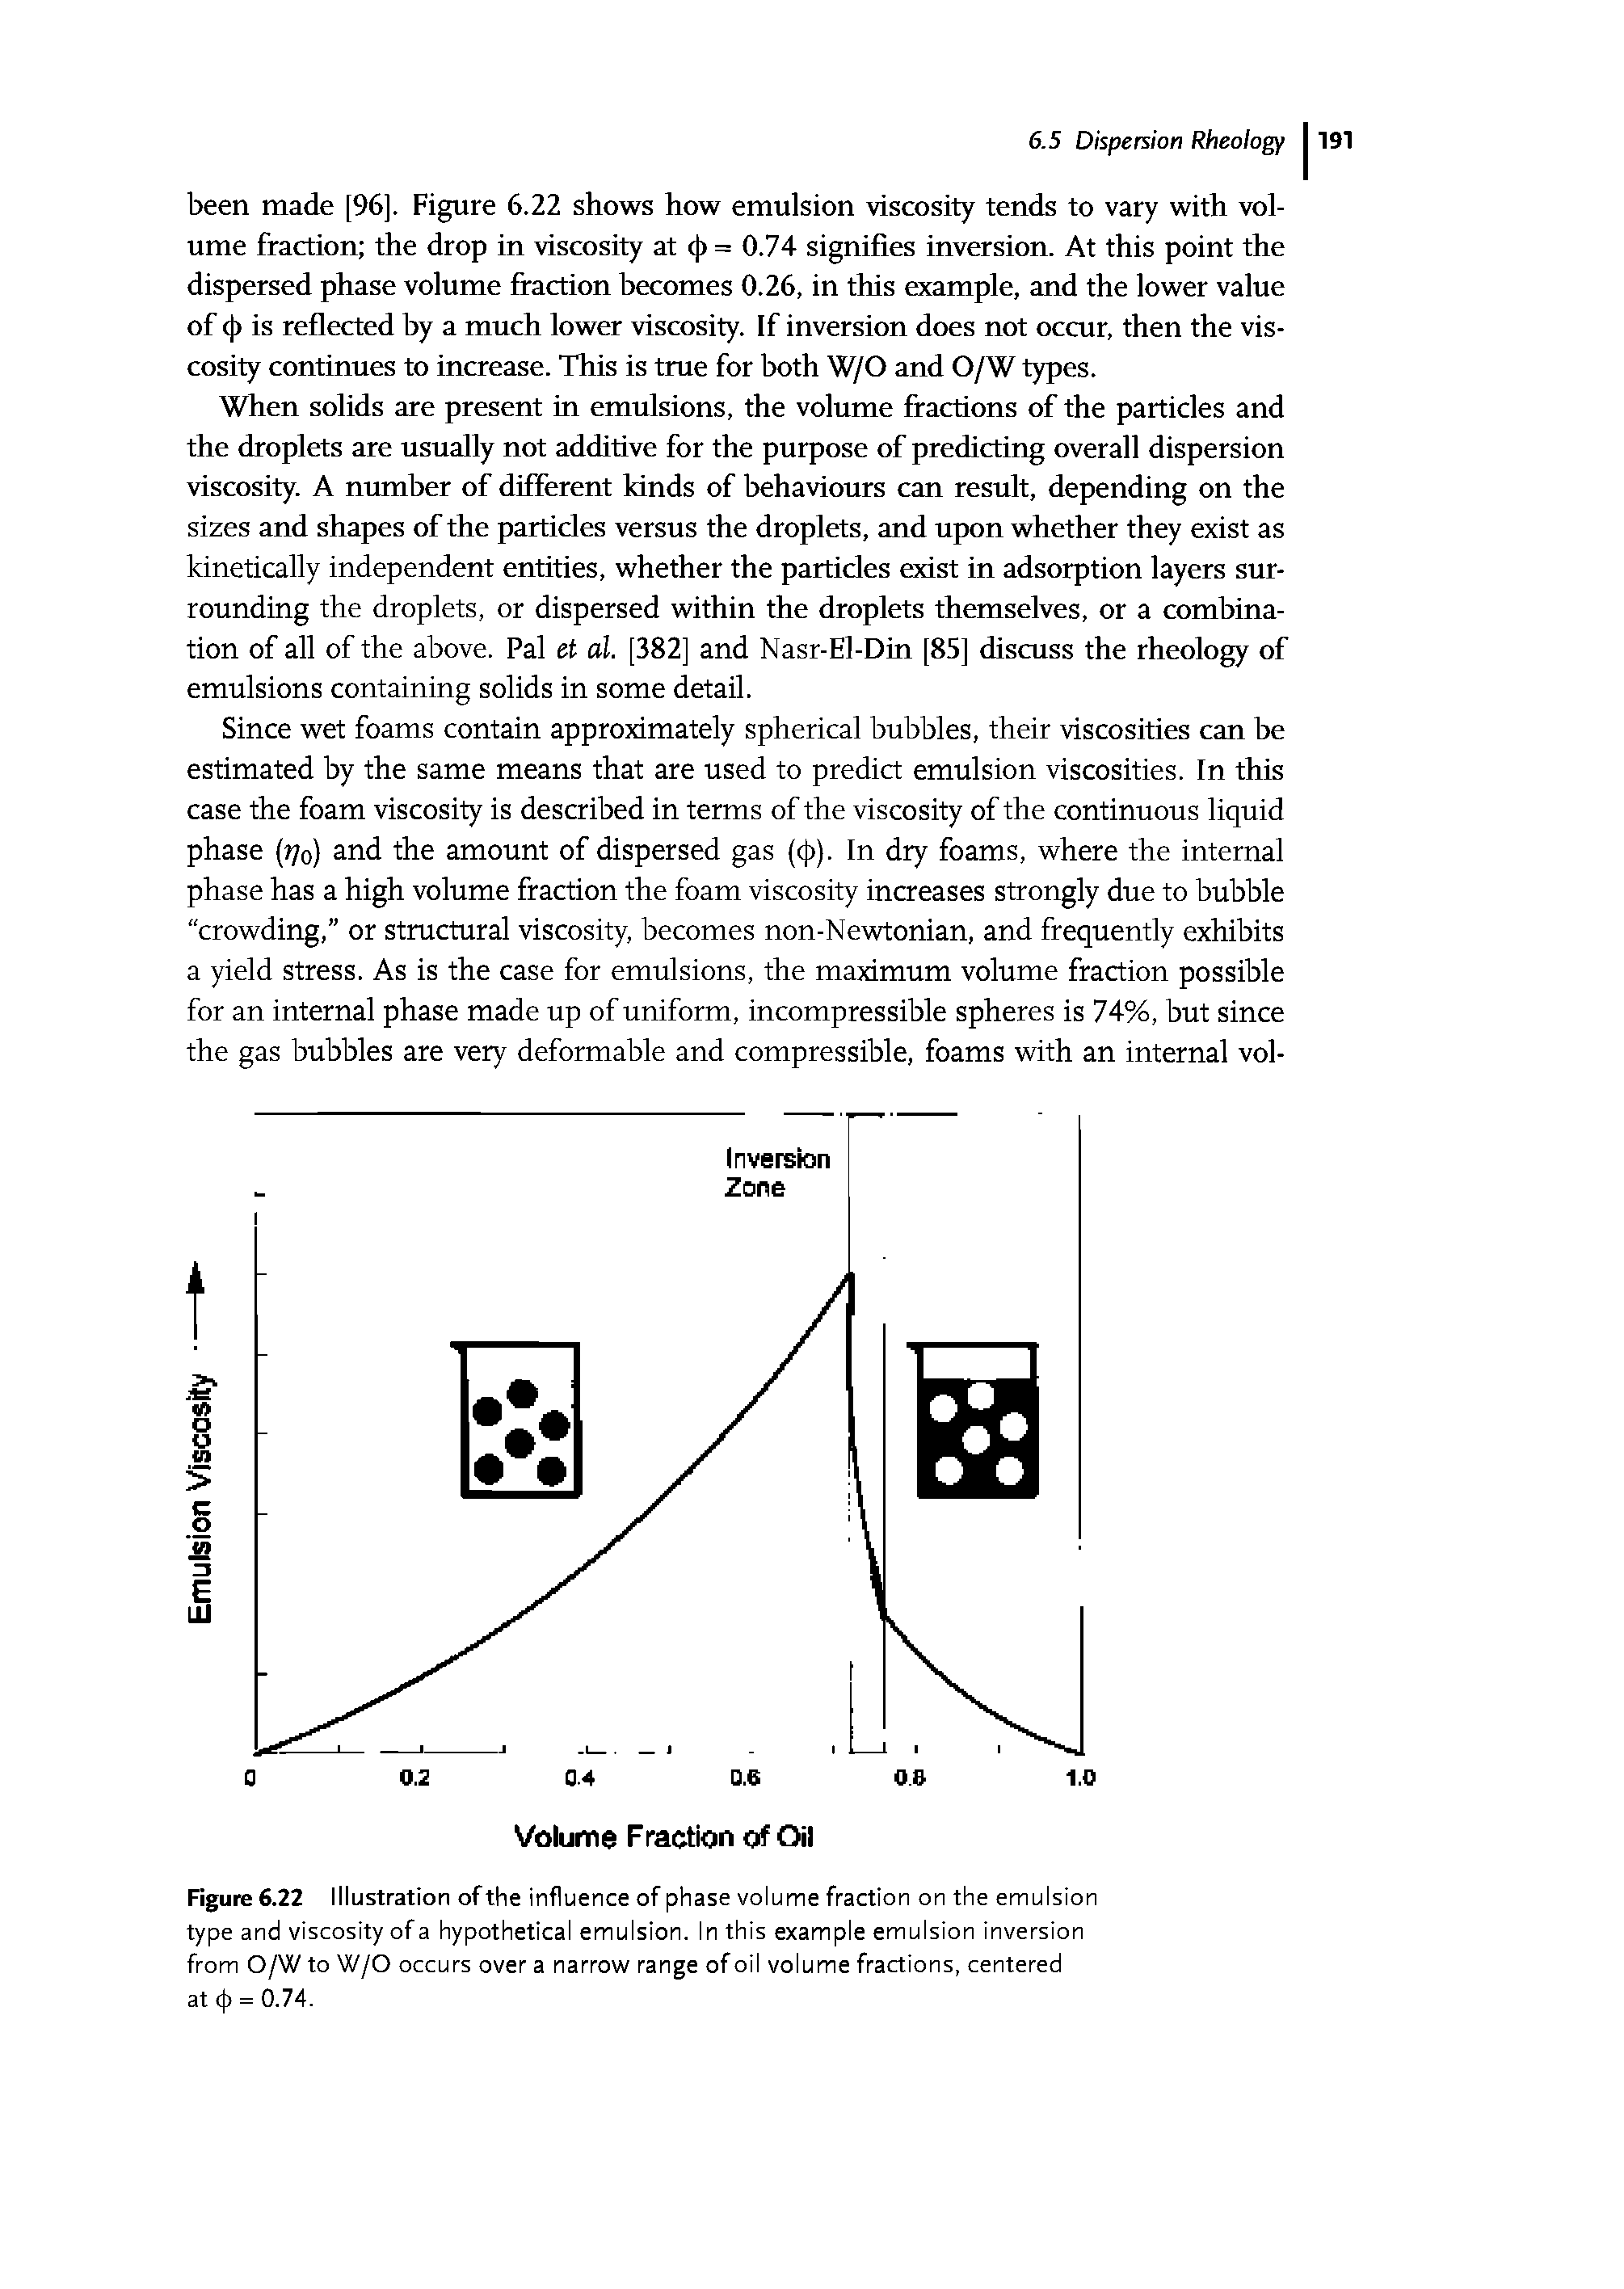 Figure 6.22 Illustration of the influence of phase volume fraction on the emulsion type and viscosity of a hypothetical emulsion. In this example emulsion inversion from O/W to W/O occurs over a narrow range of oil volume fractions, centered at 4> = 0.74.